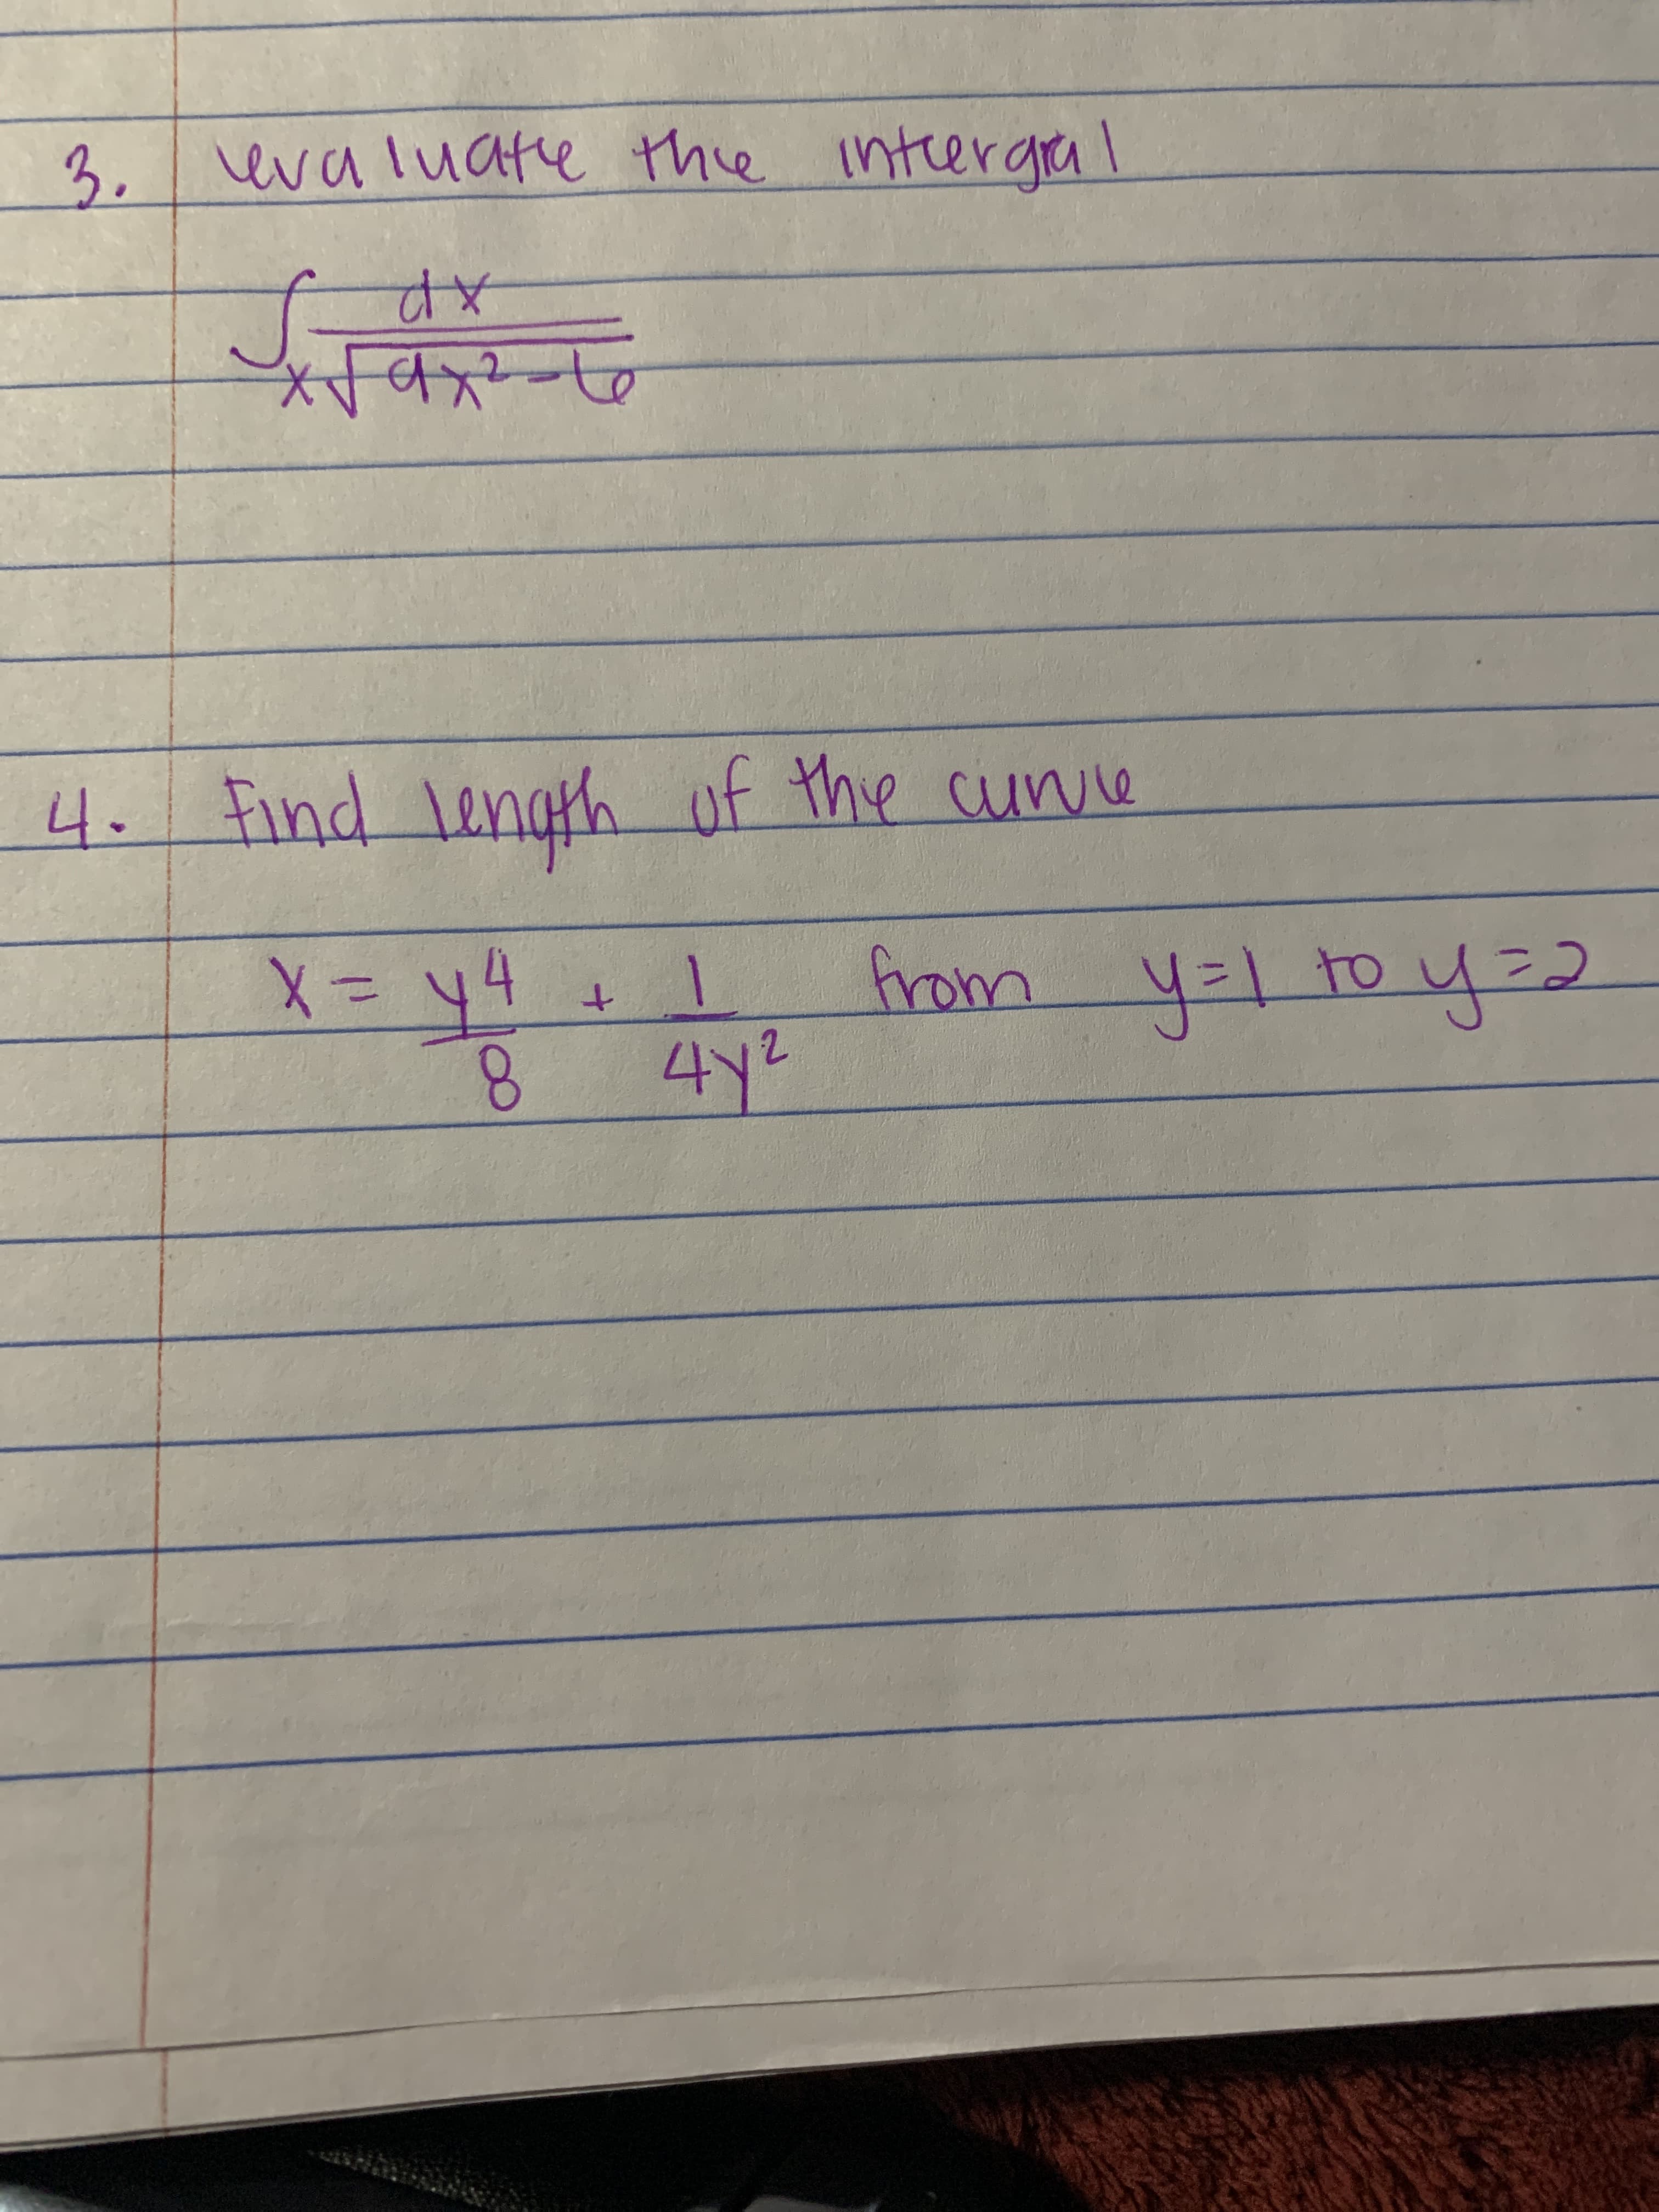 4. find length of thie cune
from 4=1 to y2
41
